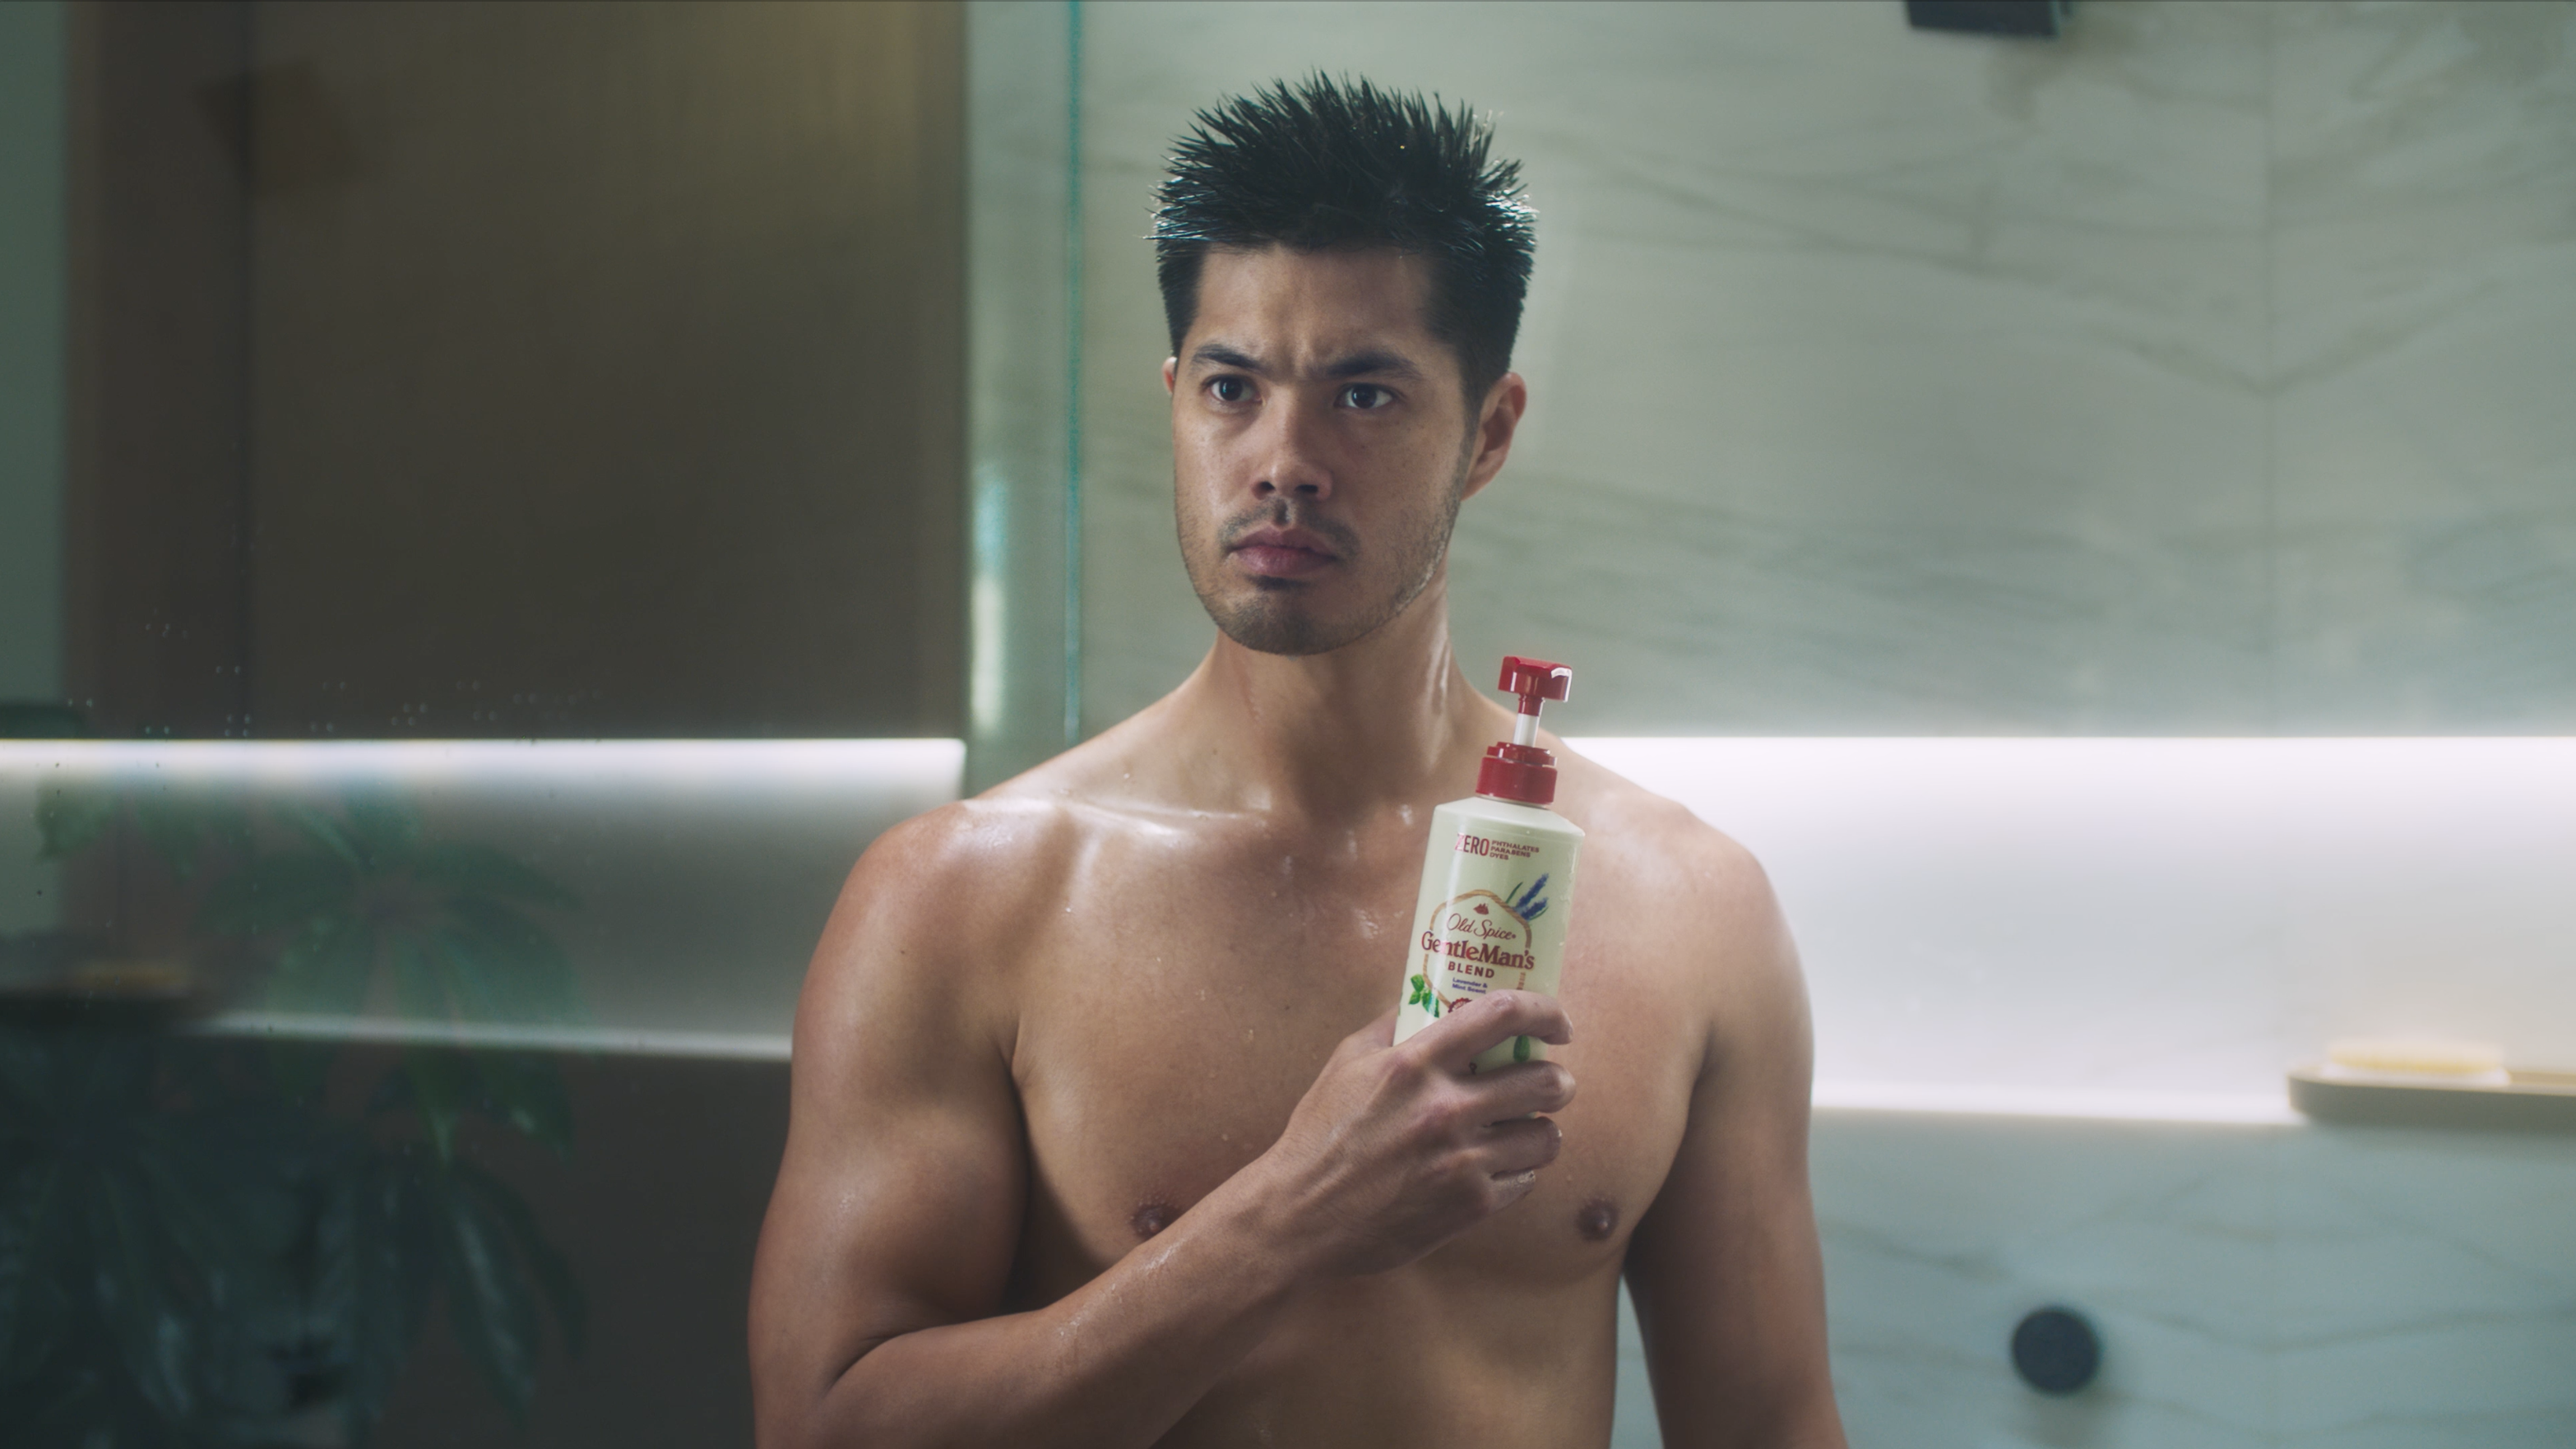 We had the pleasure of producing this commercial for Old Spice starring Ross Butler of Riverdale and Shazam. Co-stars were Peggy Lu (Venom) and Melody Peng. Our commercial production team worked with PCA to execute this Old Spice project in Los Angeles.